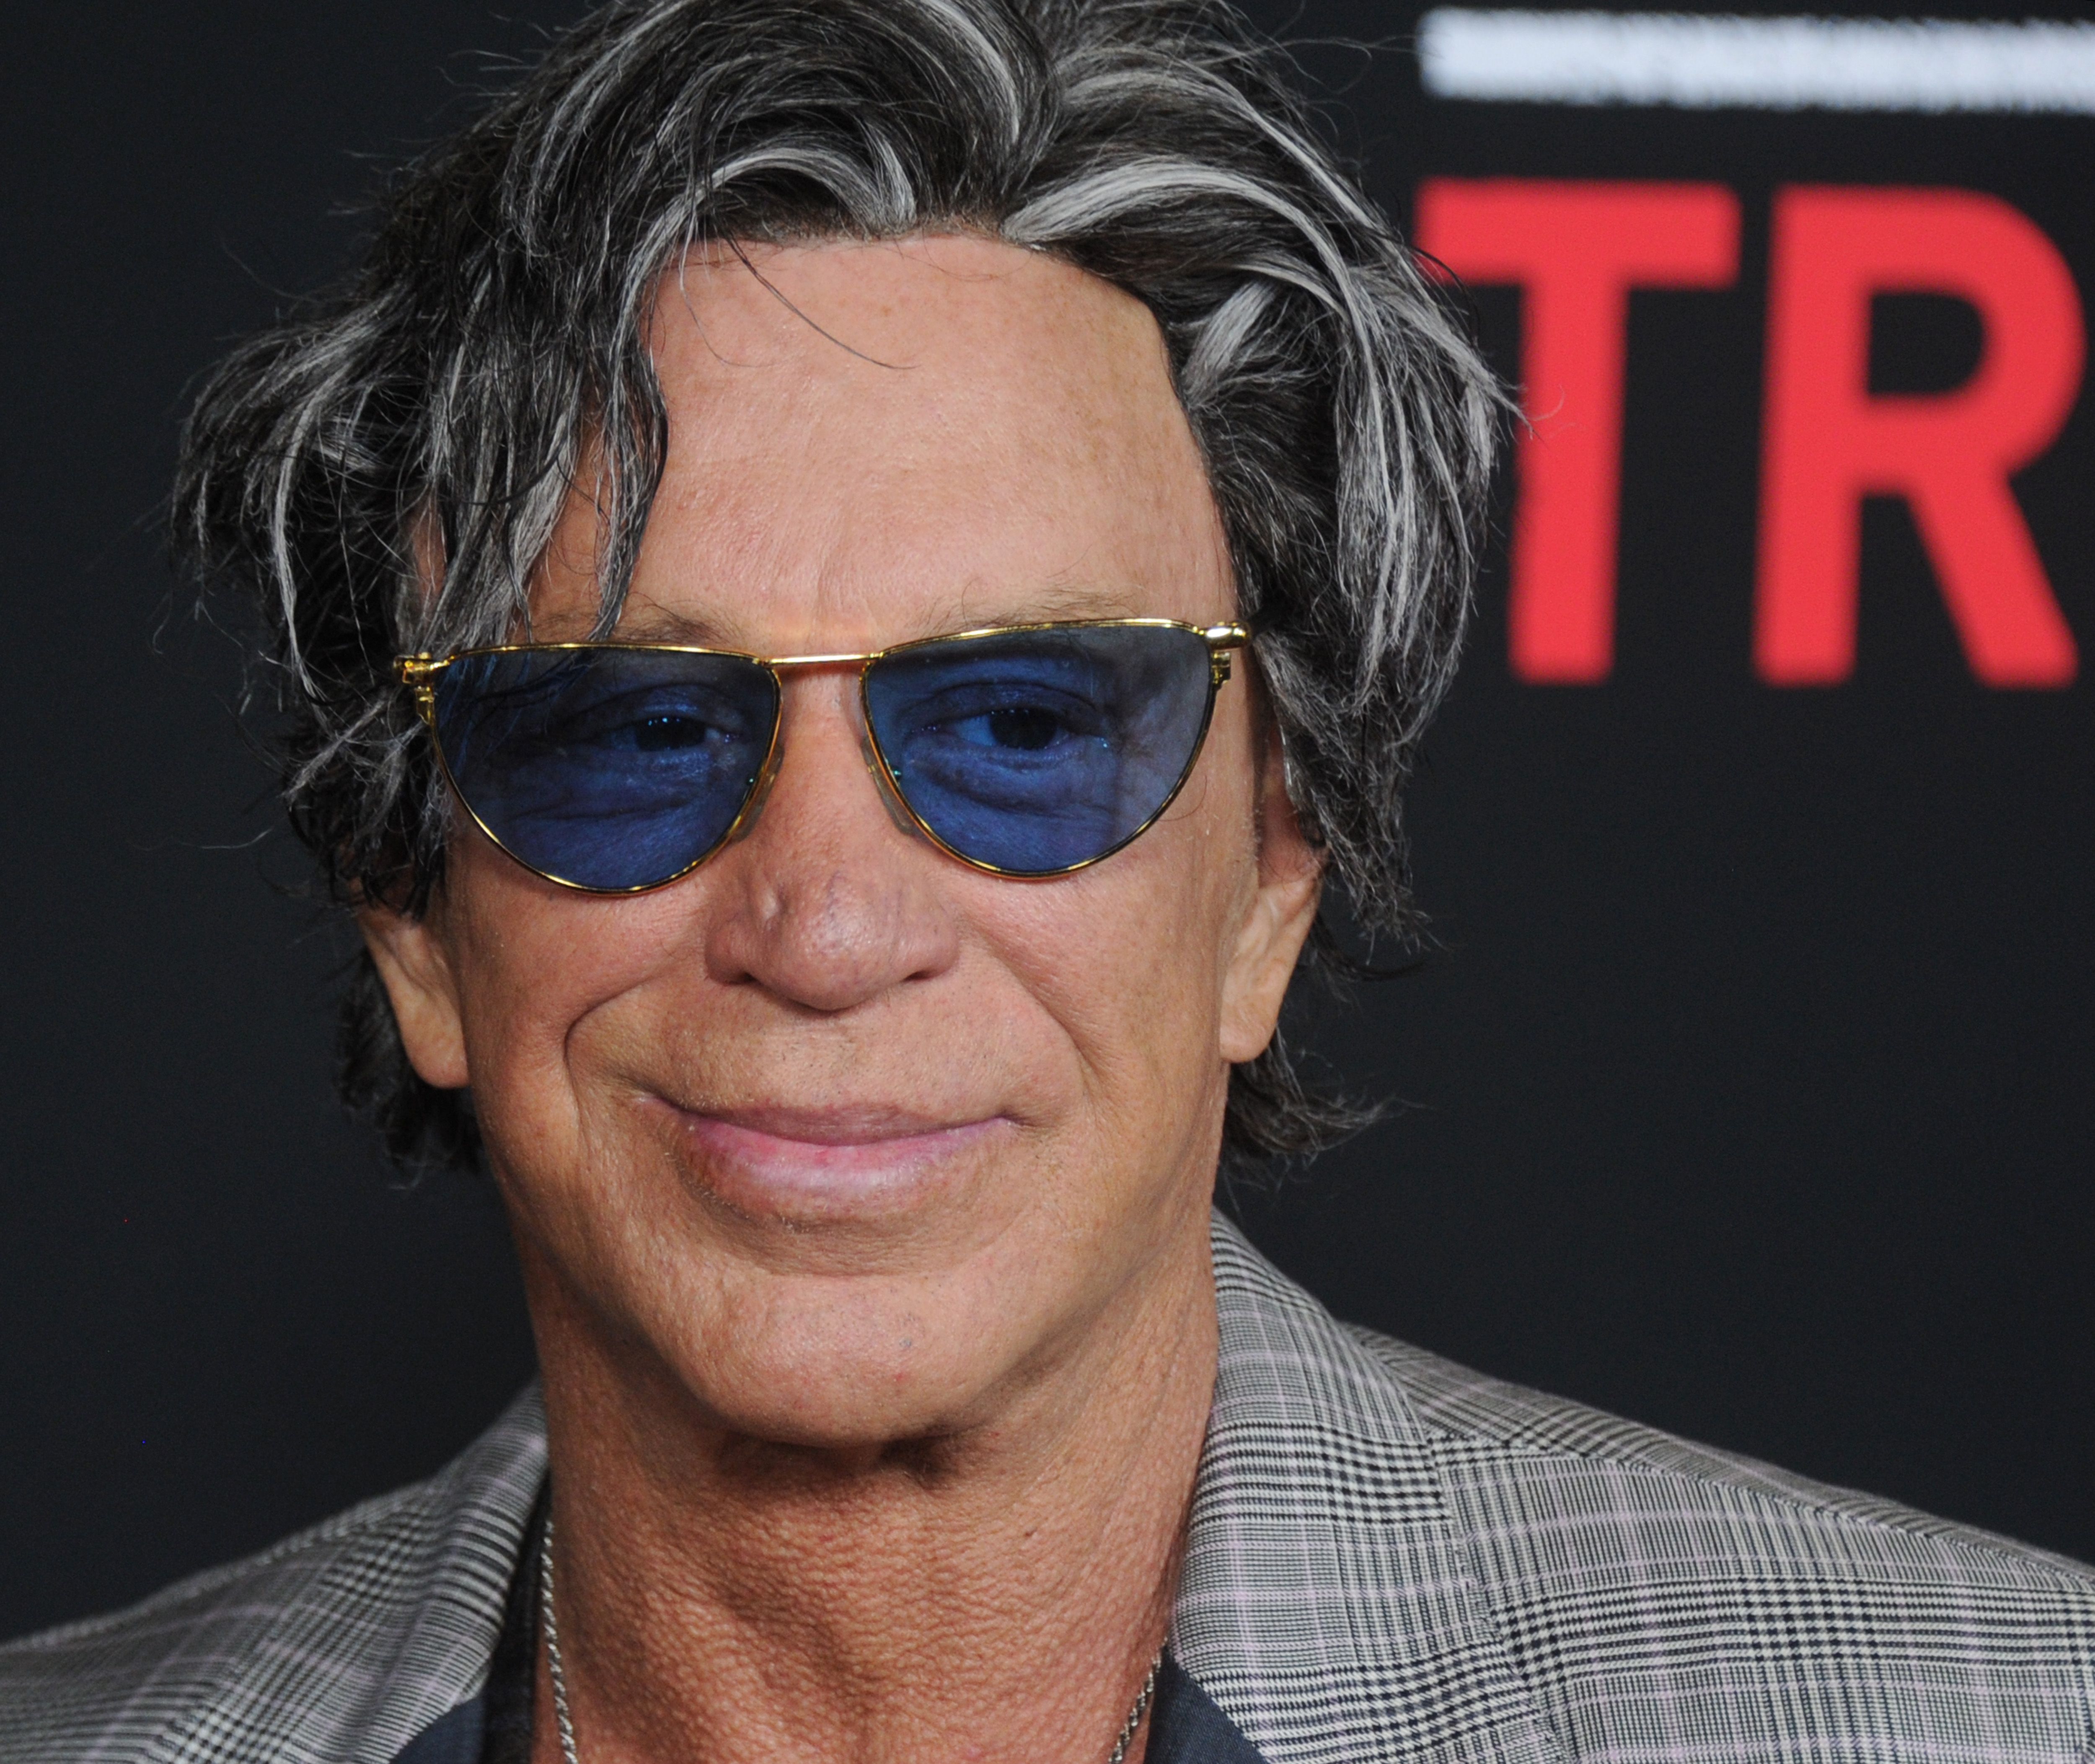 Mickey Rourke during the premiere of Open Road's "Triple 9" at Regal Cinemas L.A. Live on February 16, 2016 in Los Angeles, California. | Source: Getty Images